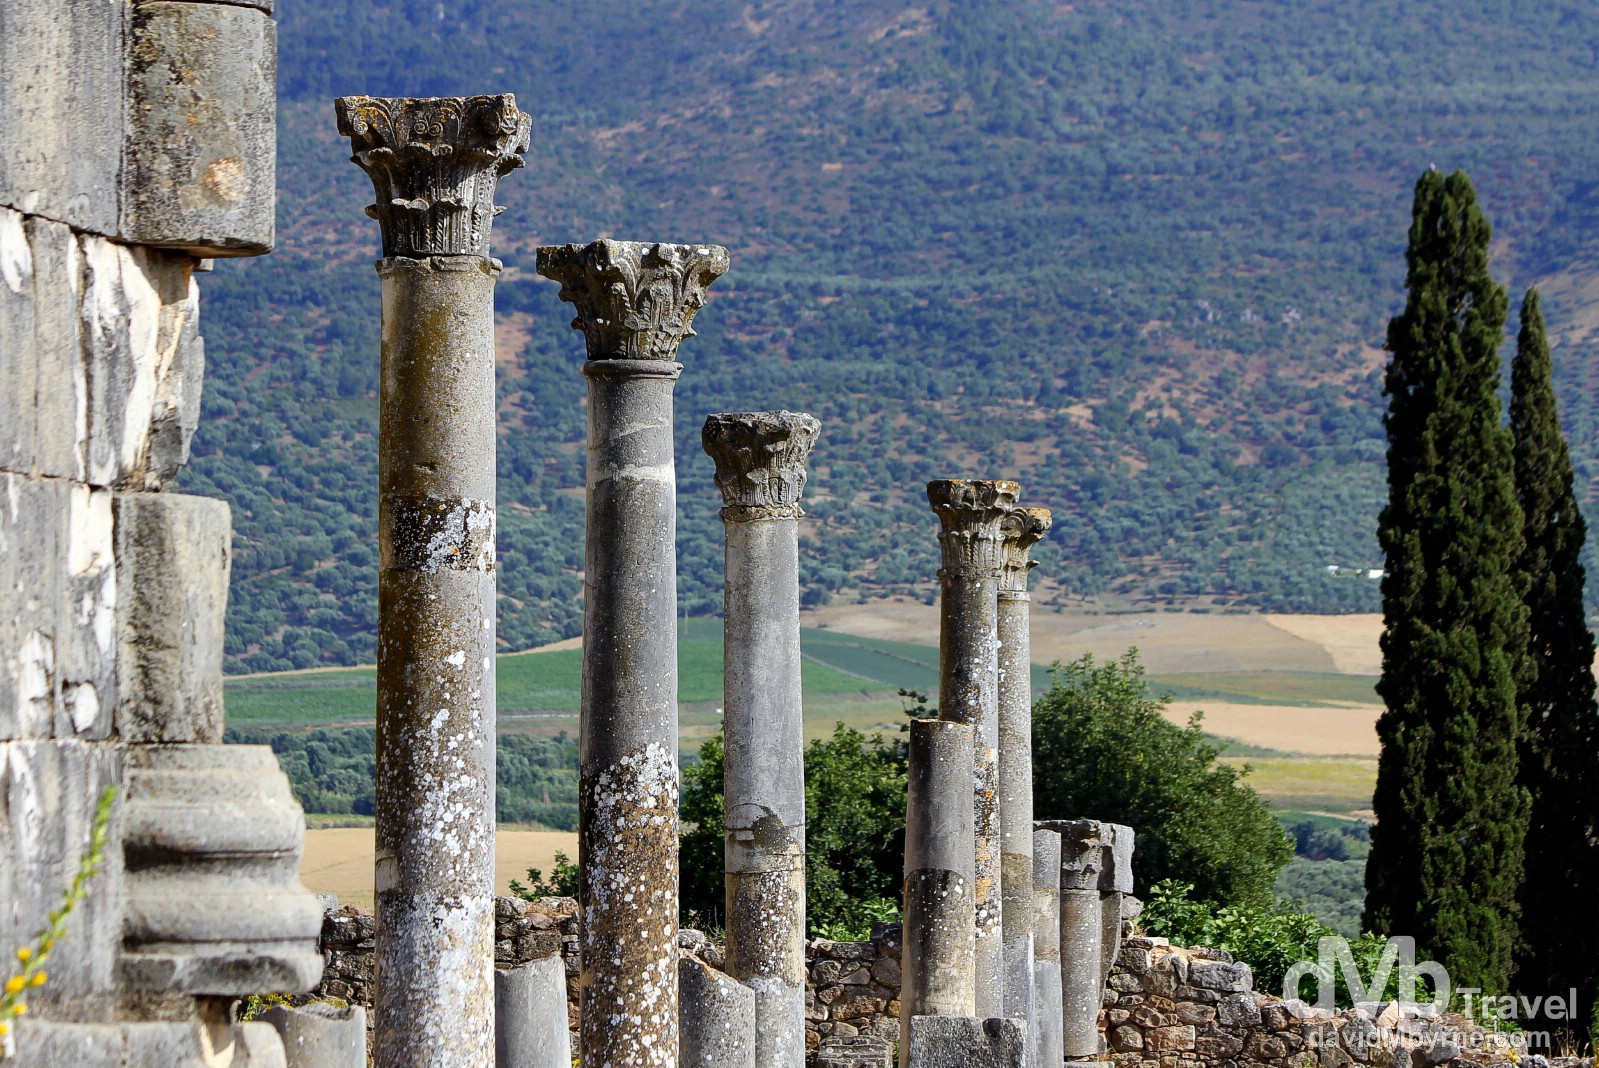 Columns of the UNESCO-listed Roman ruins of Volubilis, Morocco. May 25th, 2014.